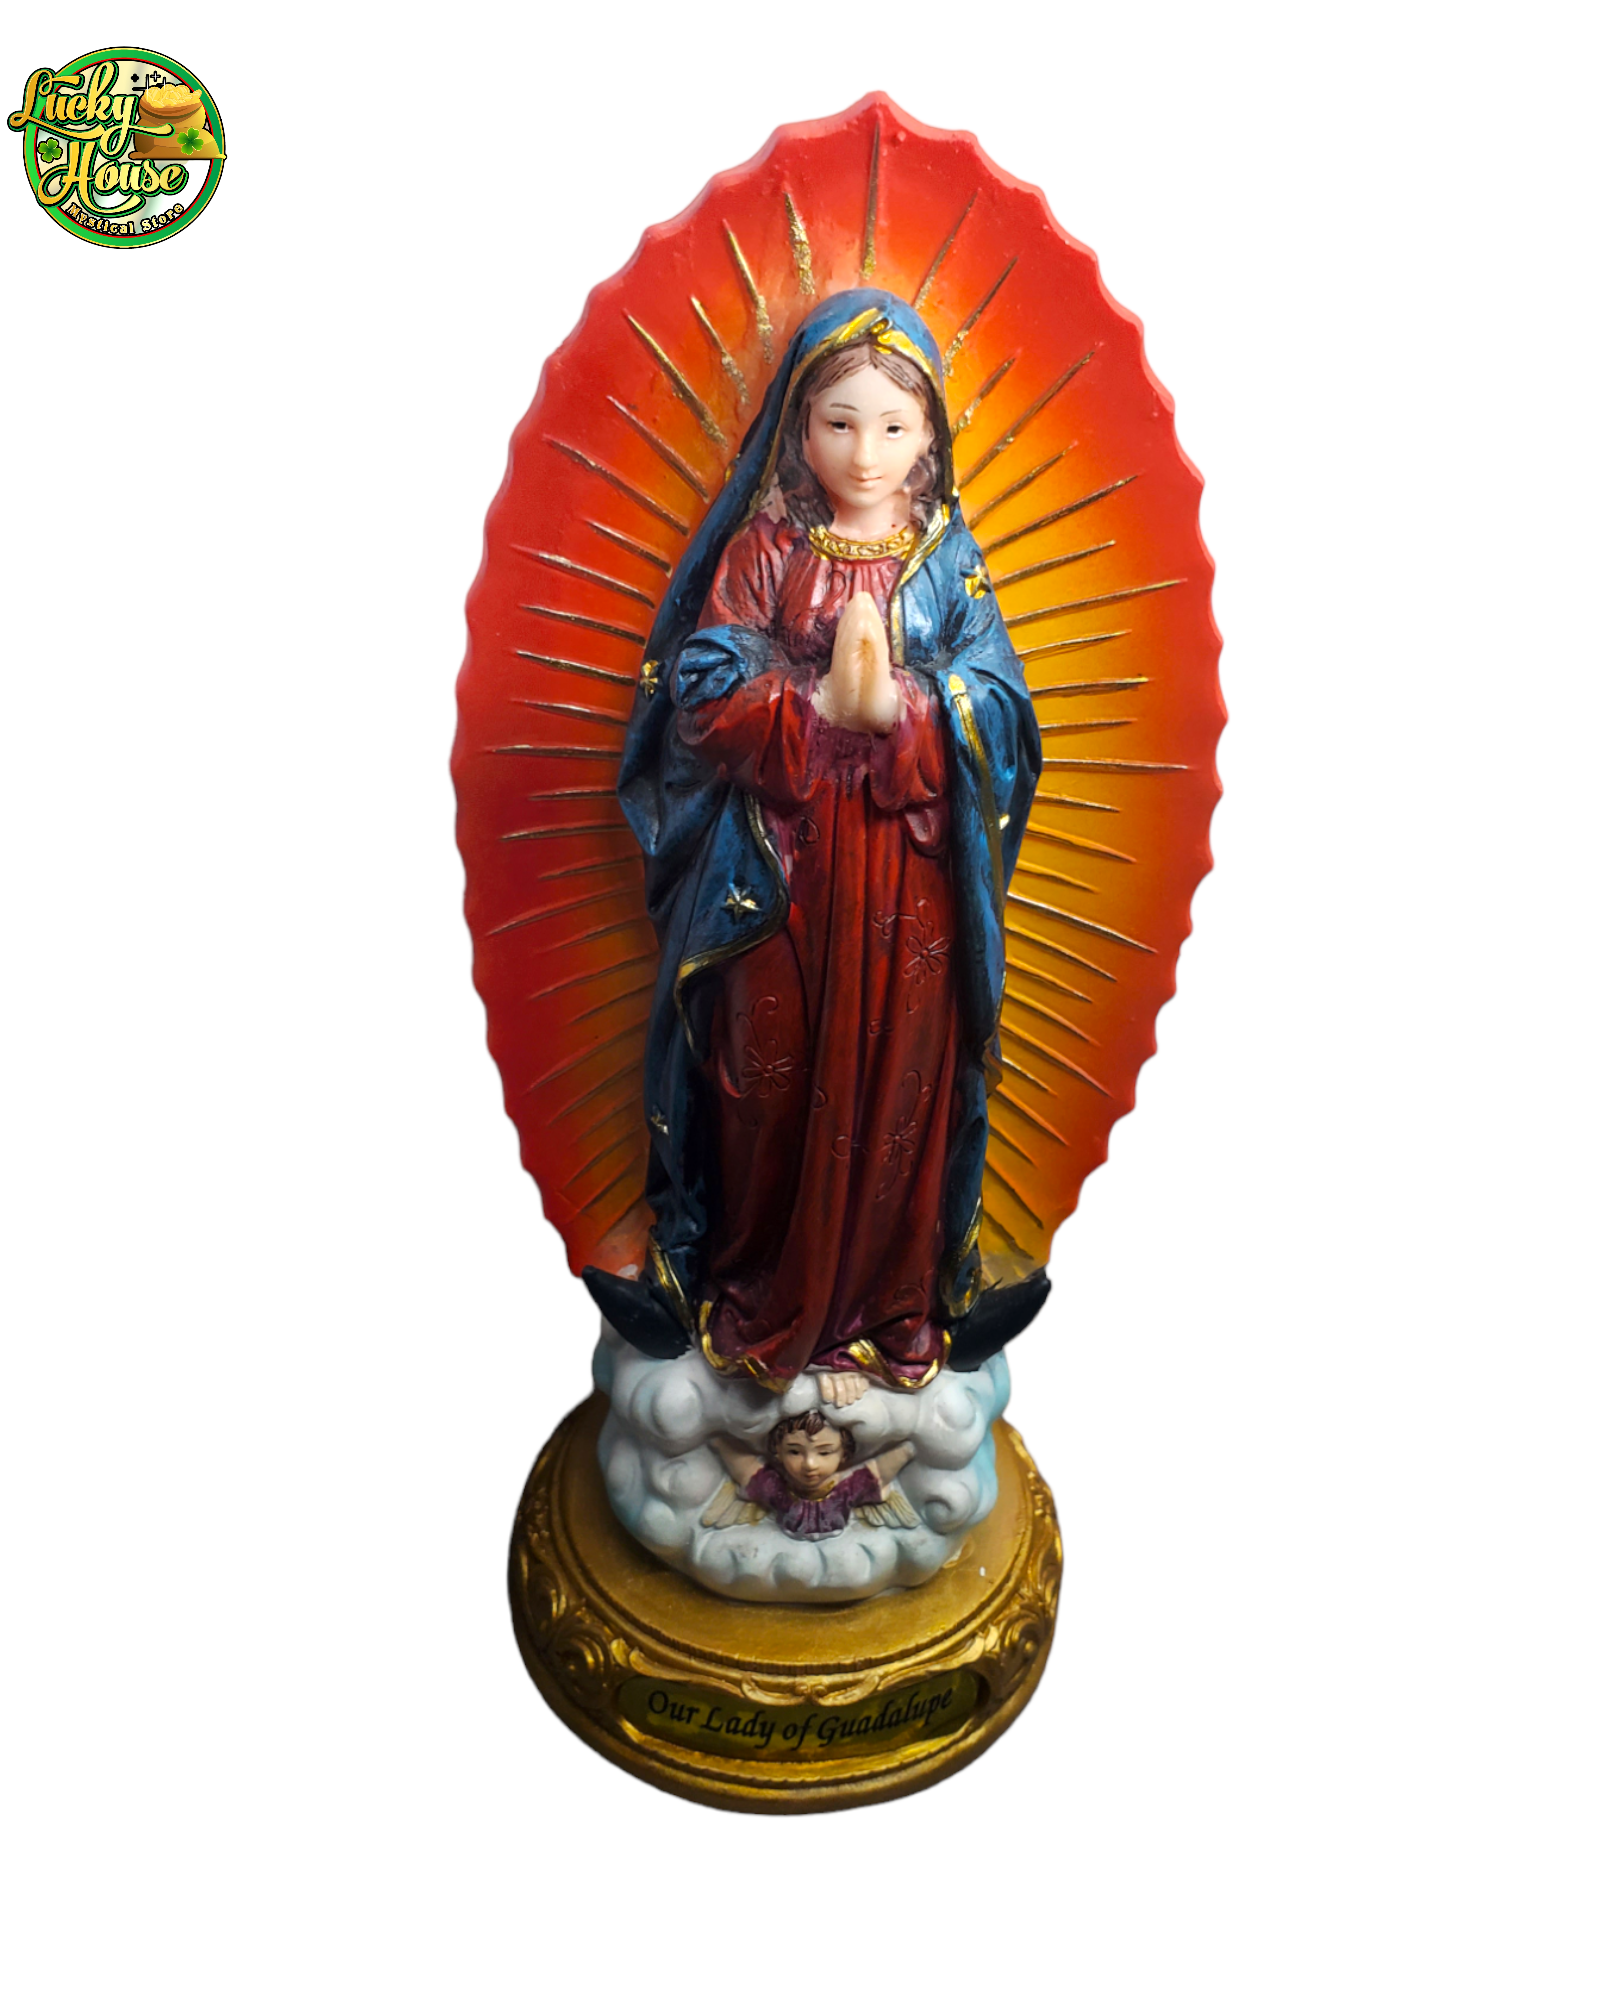 Our Lady of Guadalupe Statue (Virgen de Guadalupe)